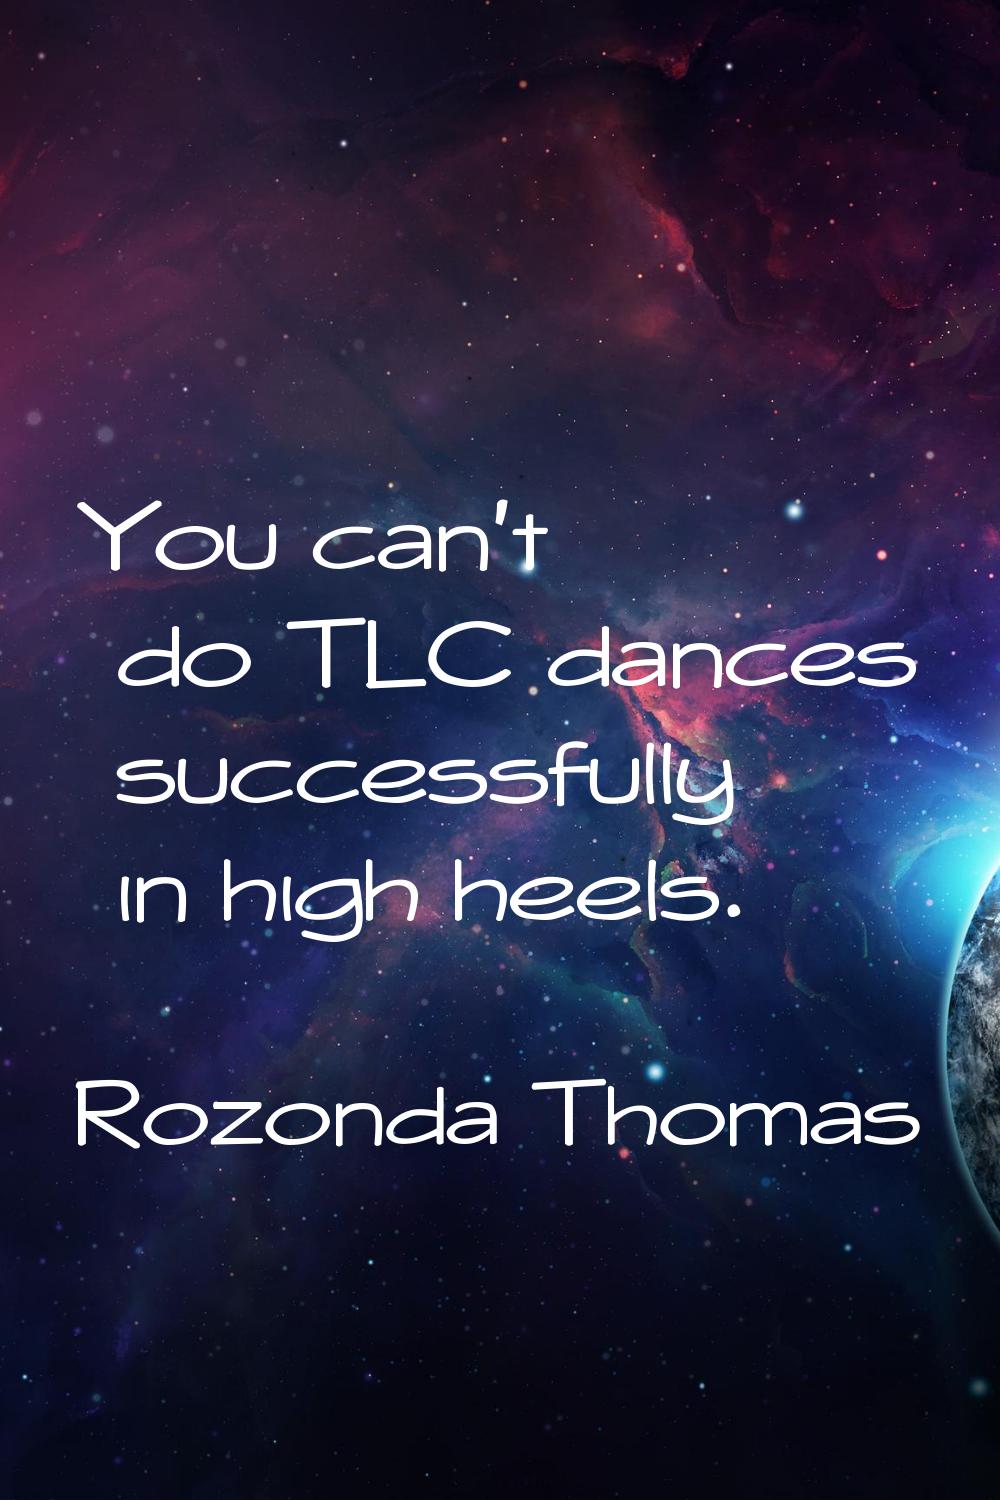 You can't do TLC dances successfully in high heels.